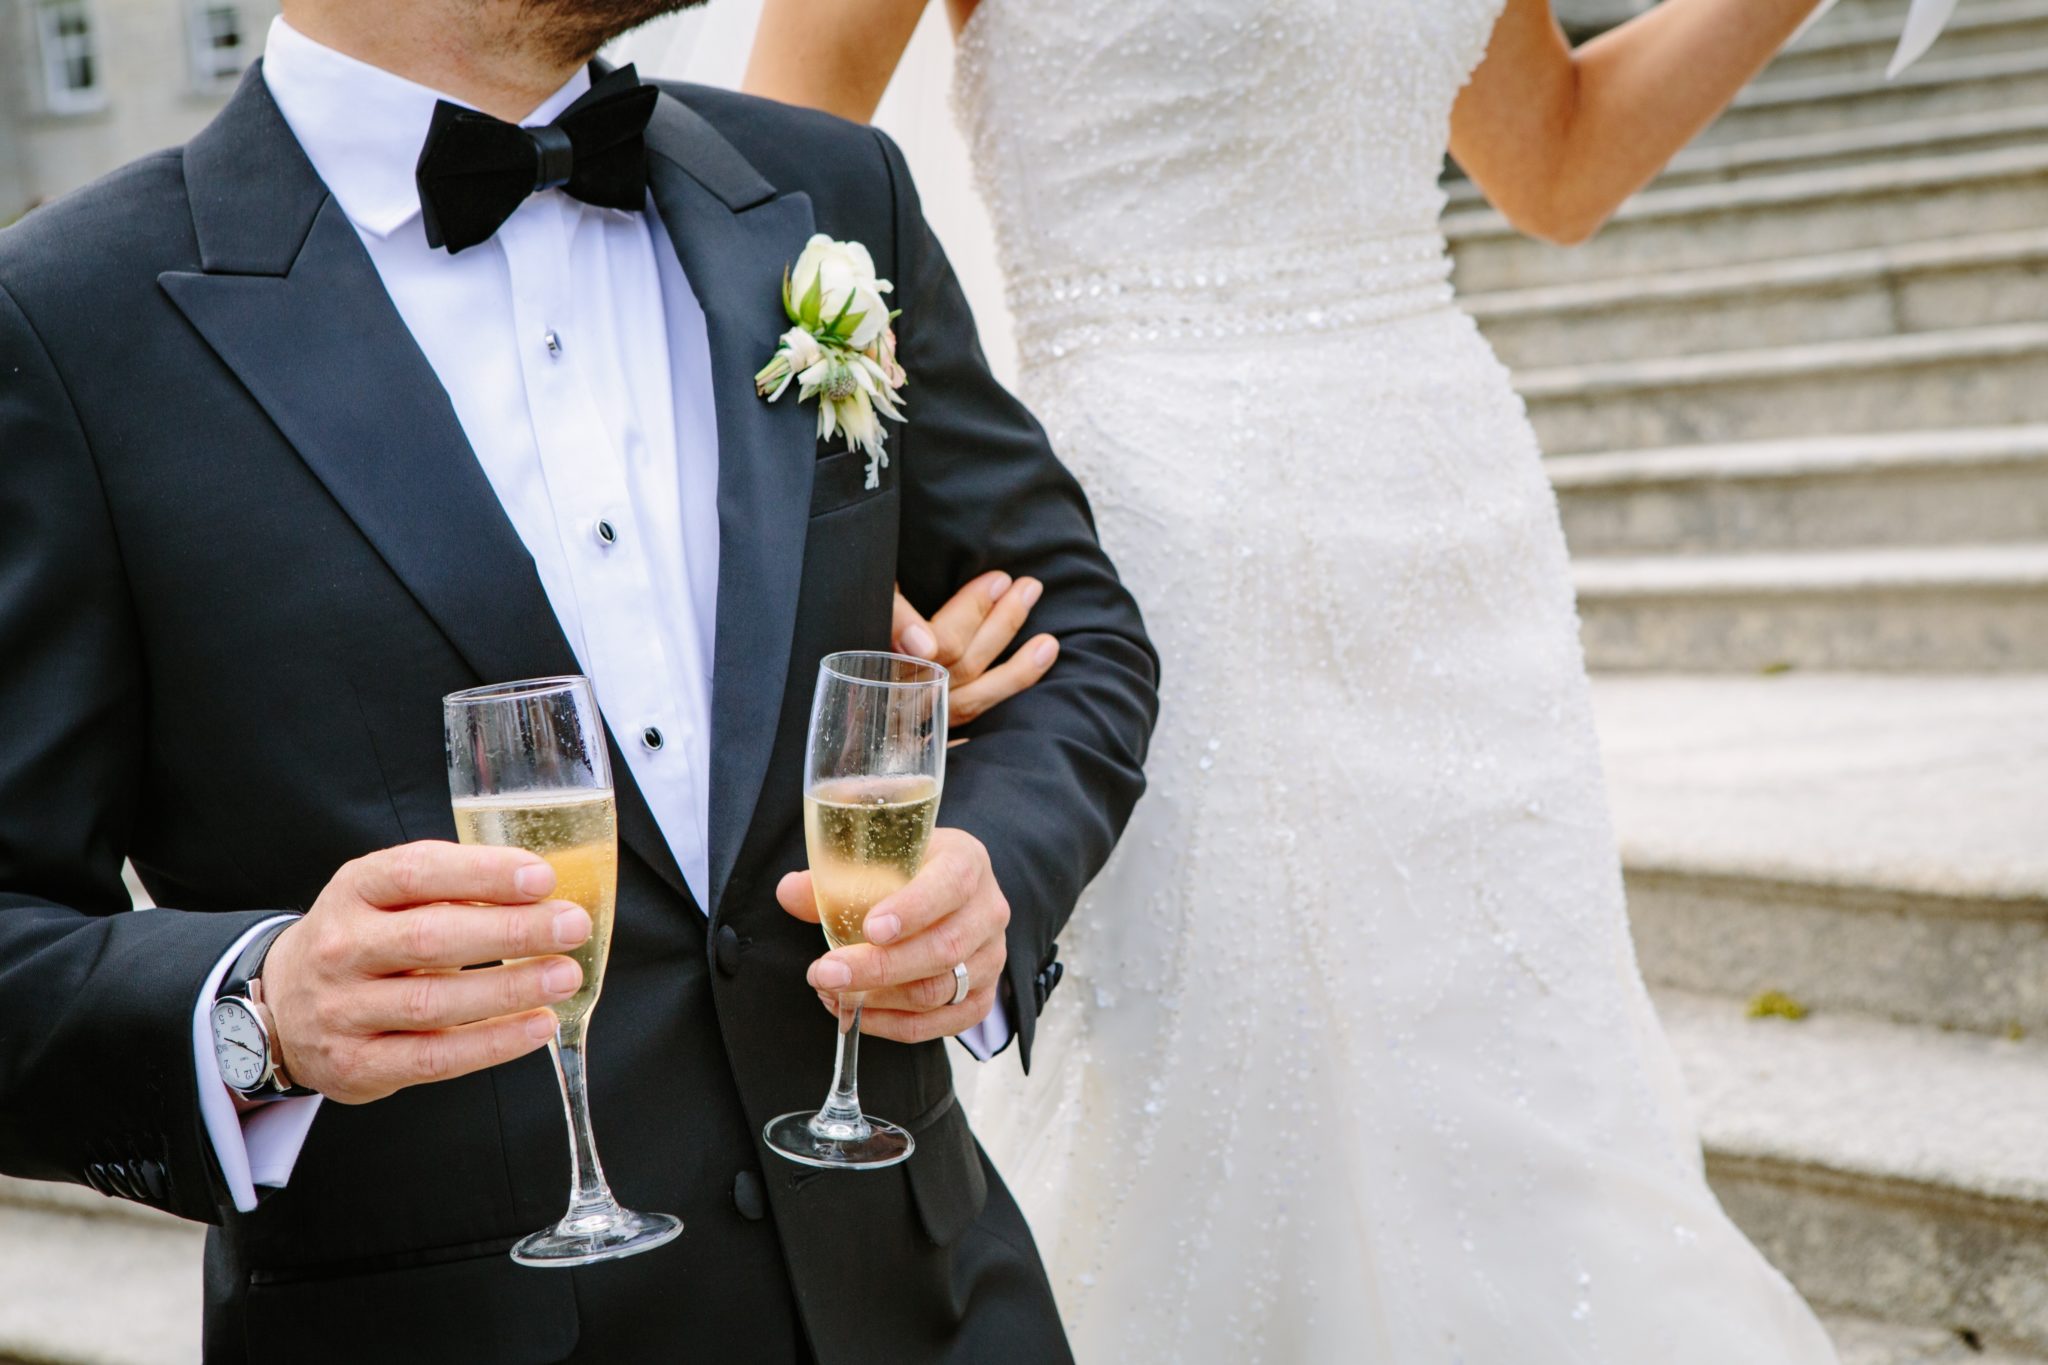 Groom wearing tuxedo holding champagne glasses with bride on his arm